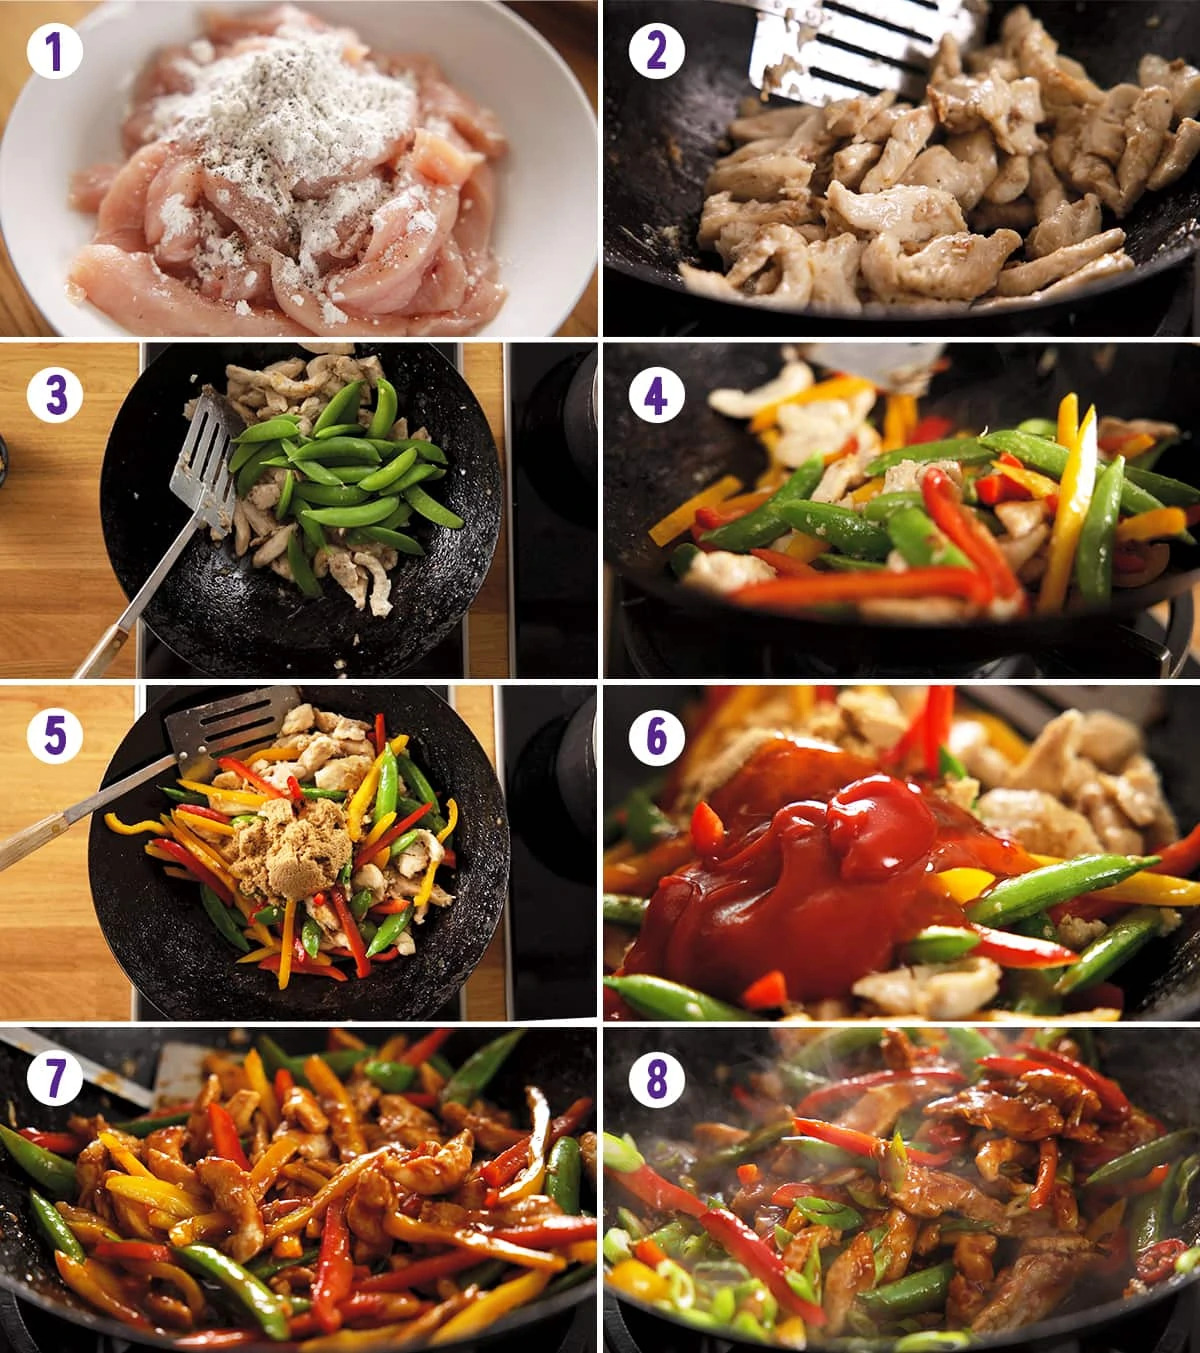 8 image collage showing how to make chicken stir fry